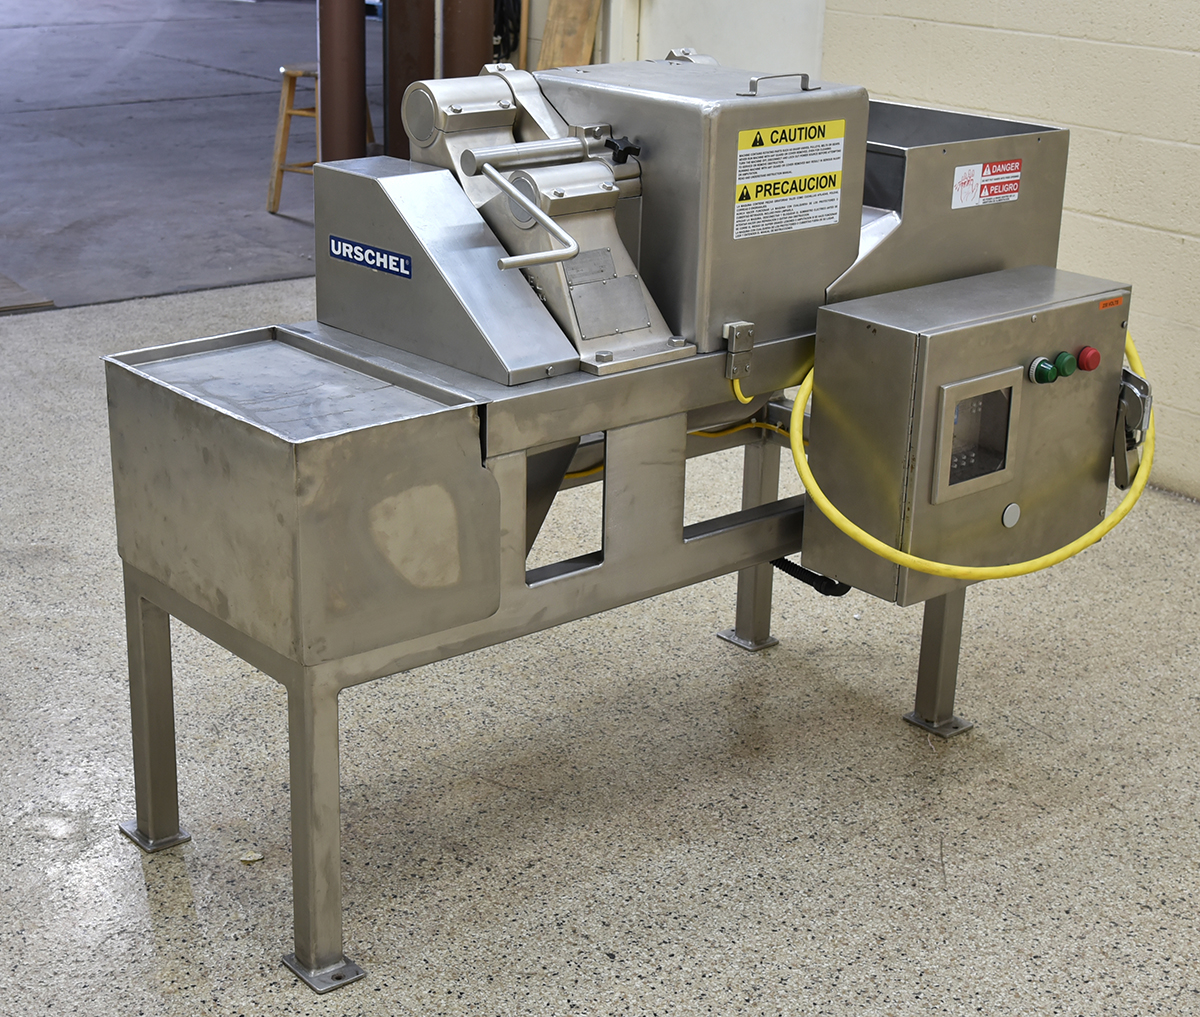 Refurbished, URSCHEL GK-A DICER, strip cutter, French fry cutter, flat or krinkle cuts, in-stock at Alard, item Y5603